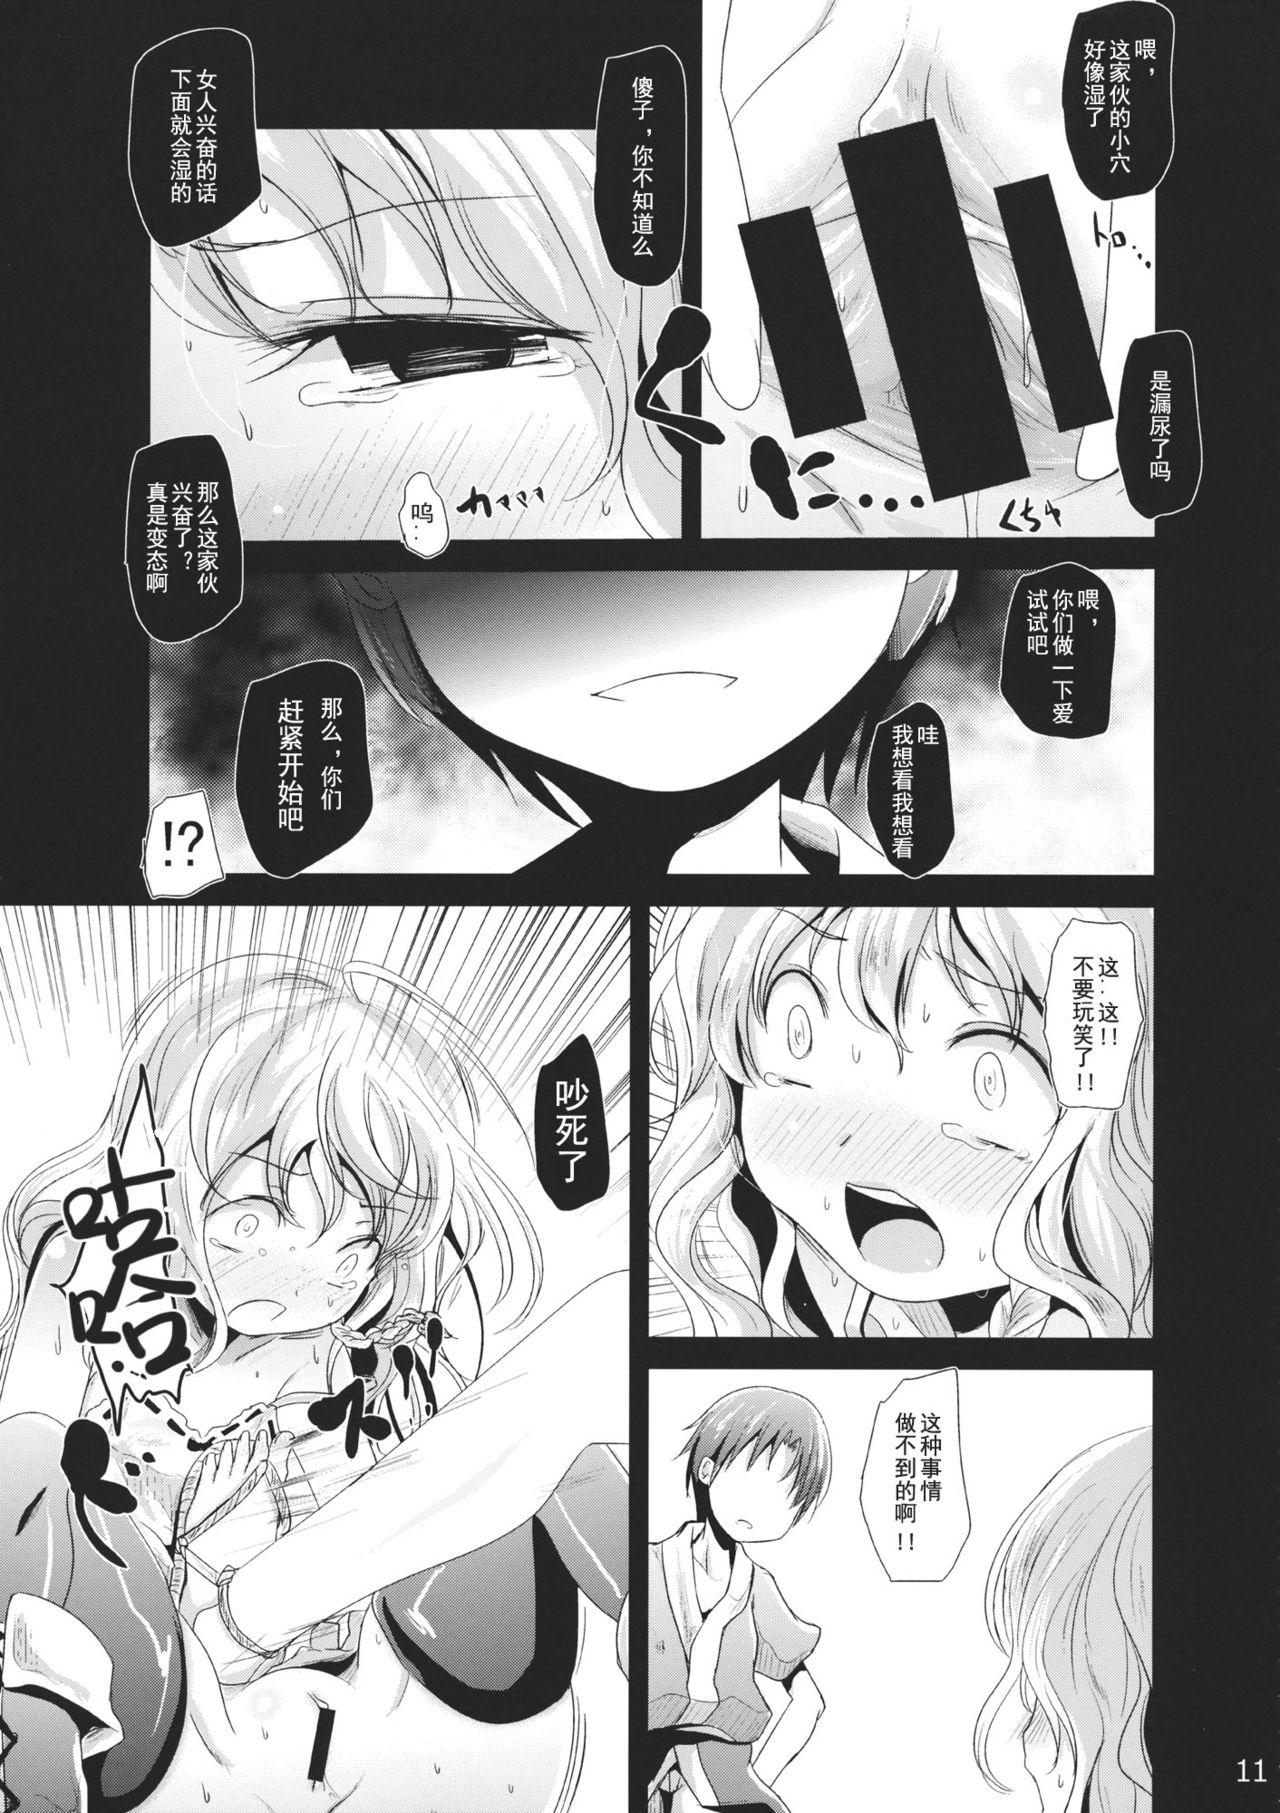 Missionary Position Porn Unsanmushou - Touhou project Uncensored - Page 11